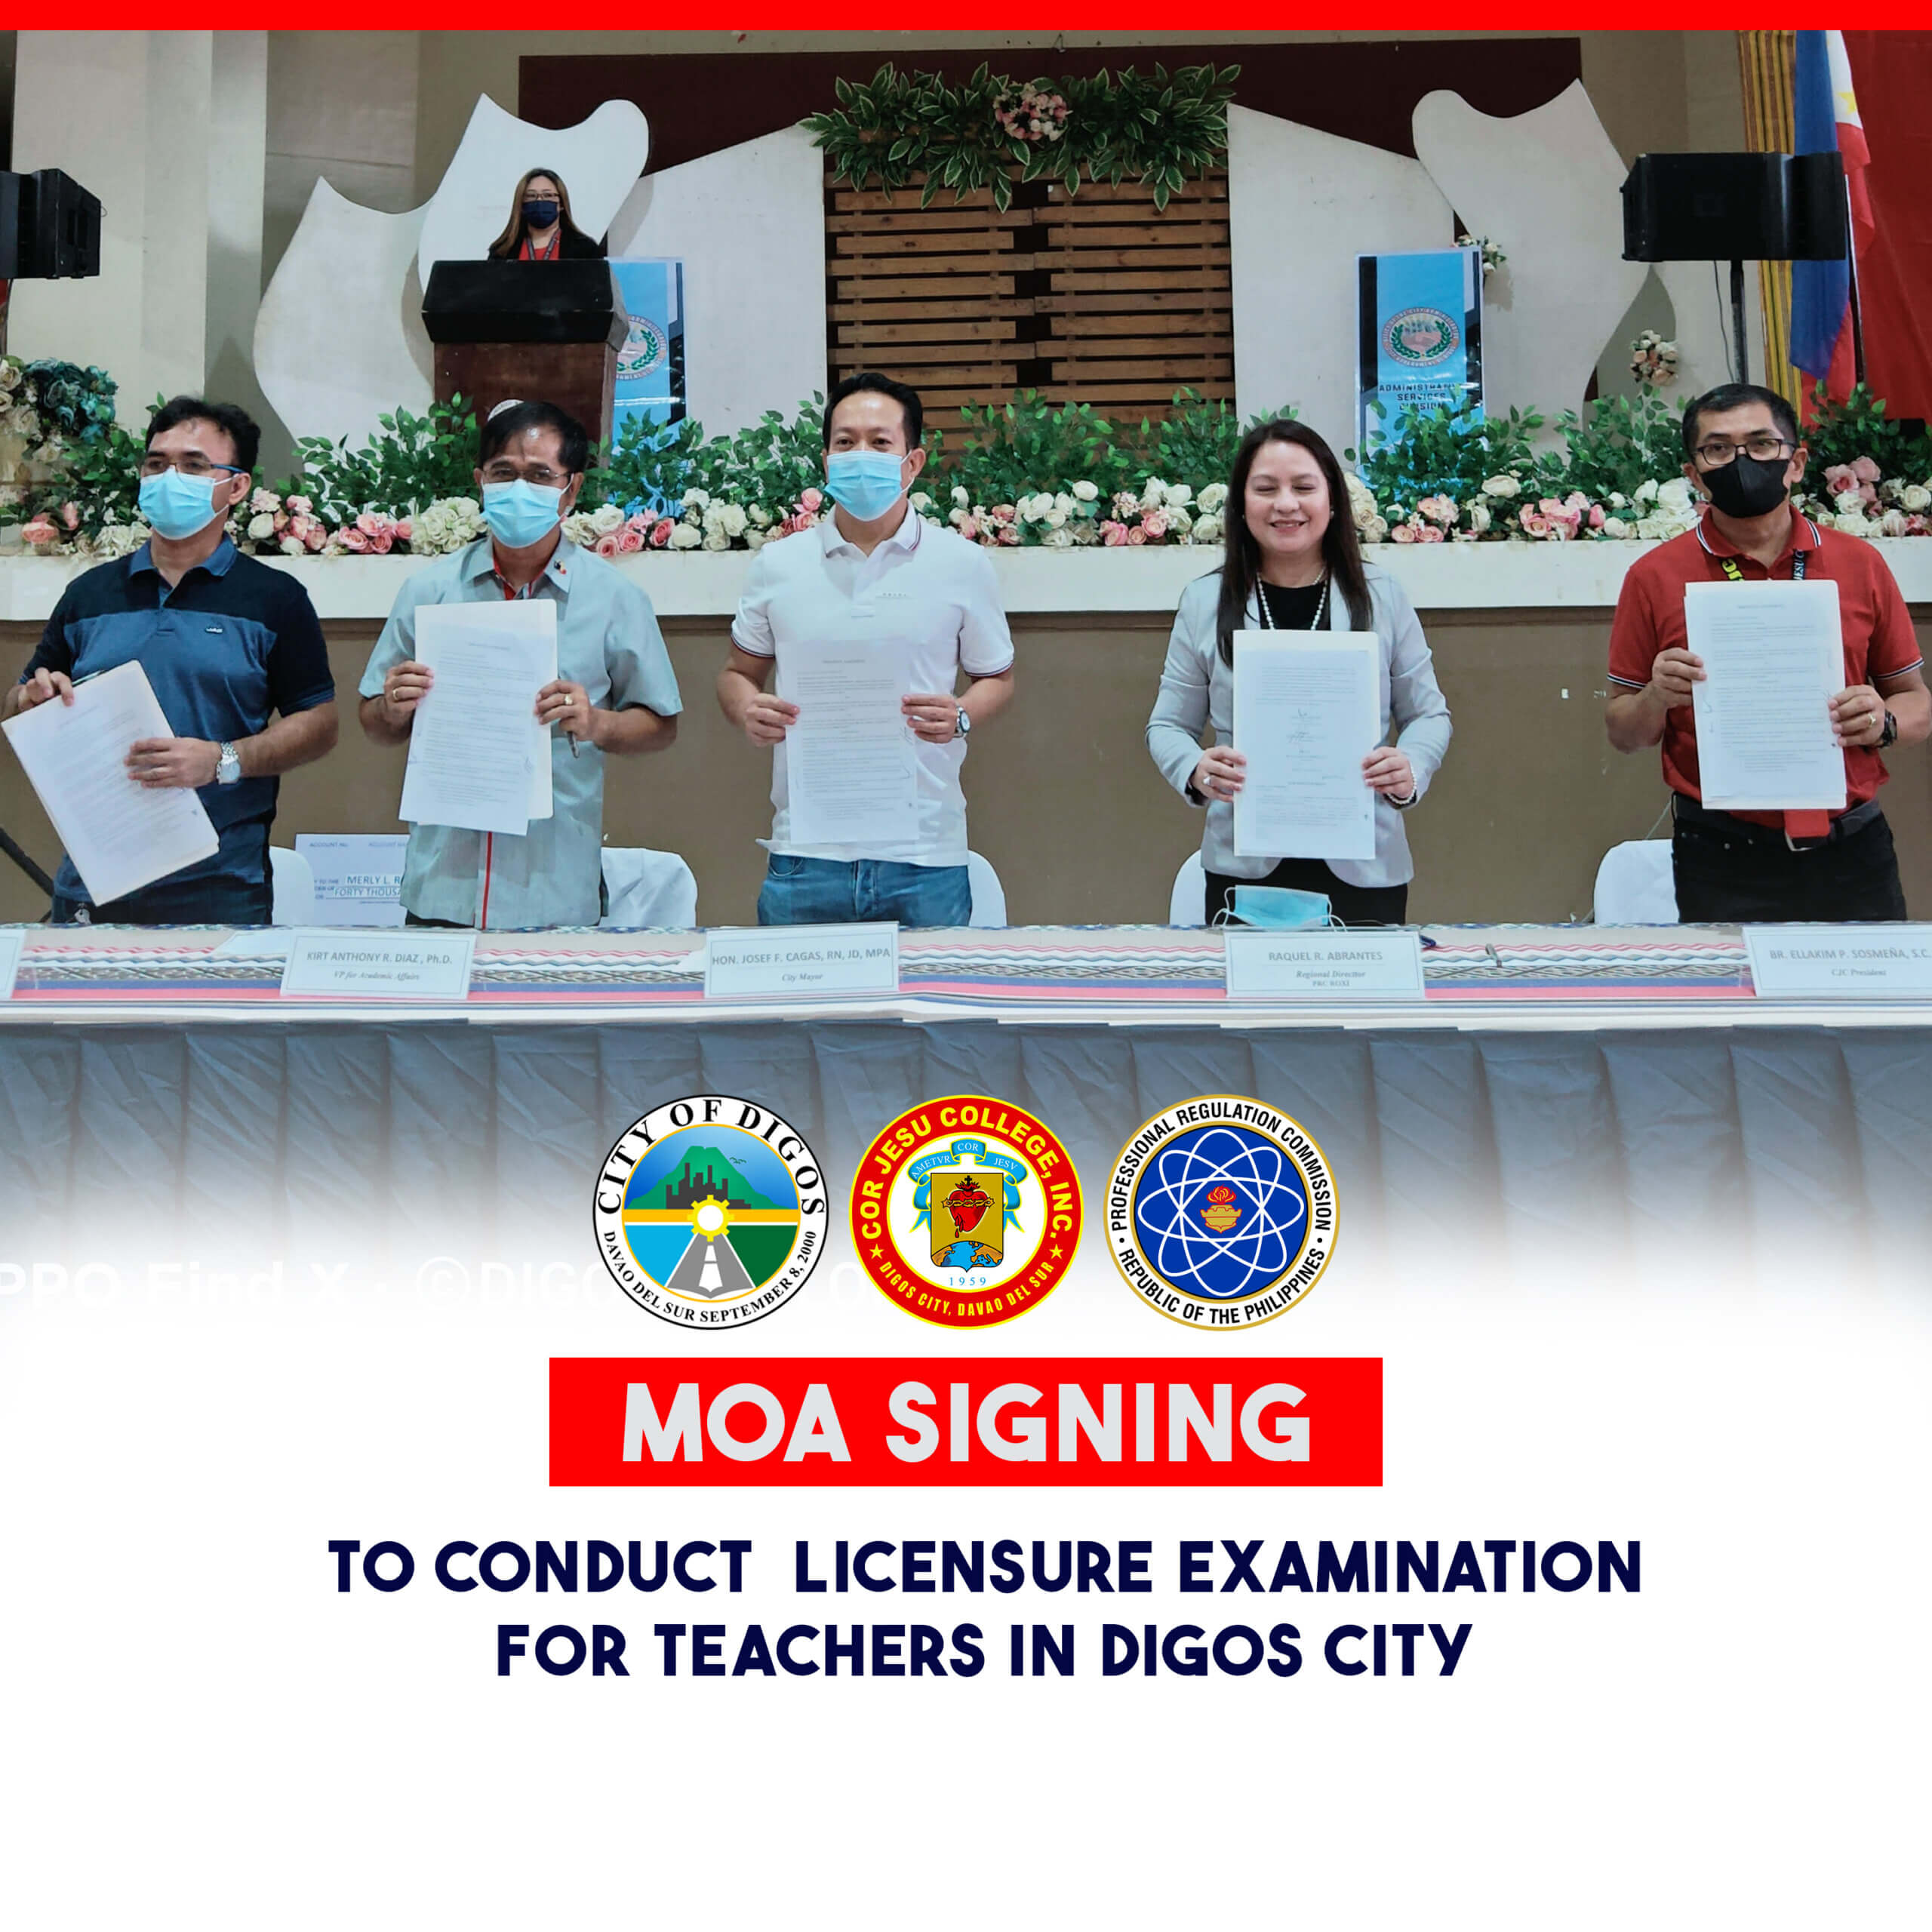 MOA Signing to Conduct Licensure Examination for Teachers in Digos City